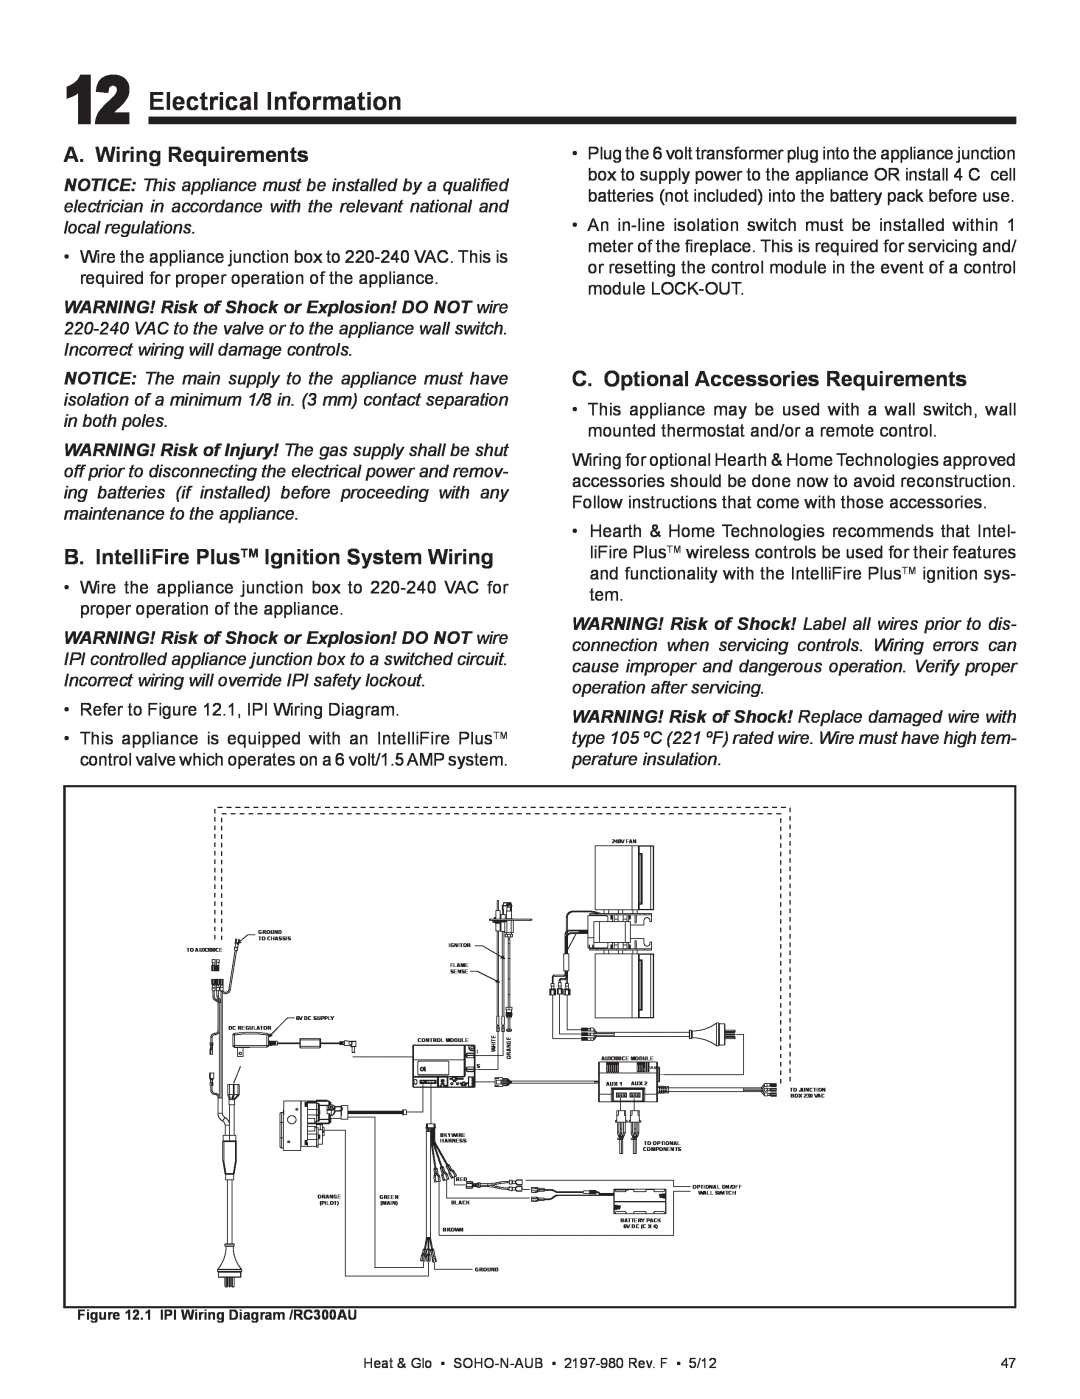 Heat & Glo LifeStyle 2197-980 Electrical Information, A. Wiring Requirements, B. IntelliFire PlusTM Ignition System Wiring 